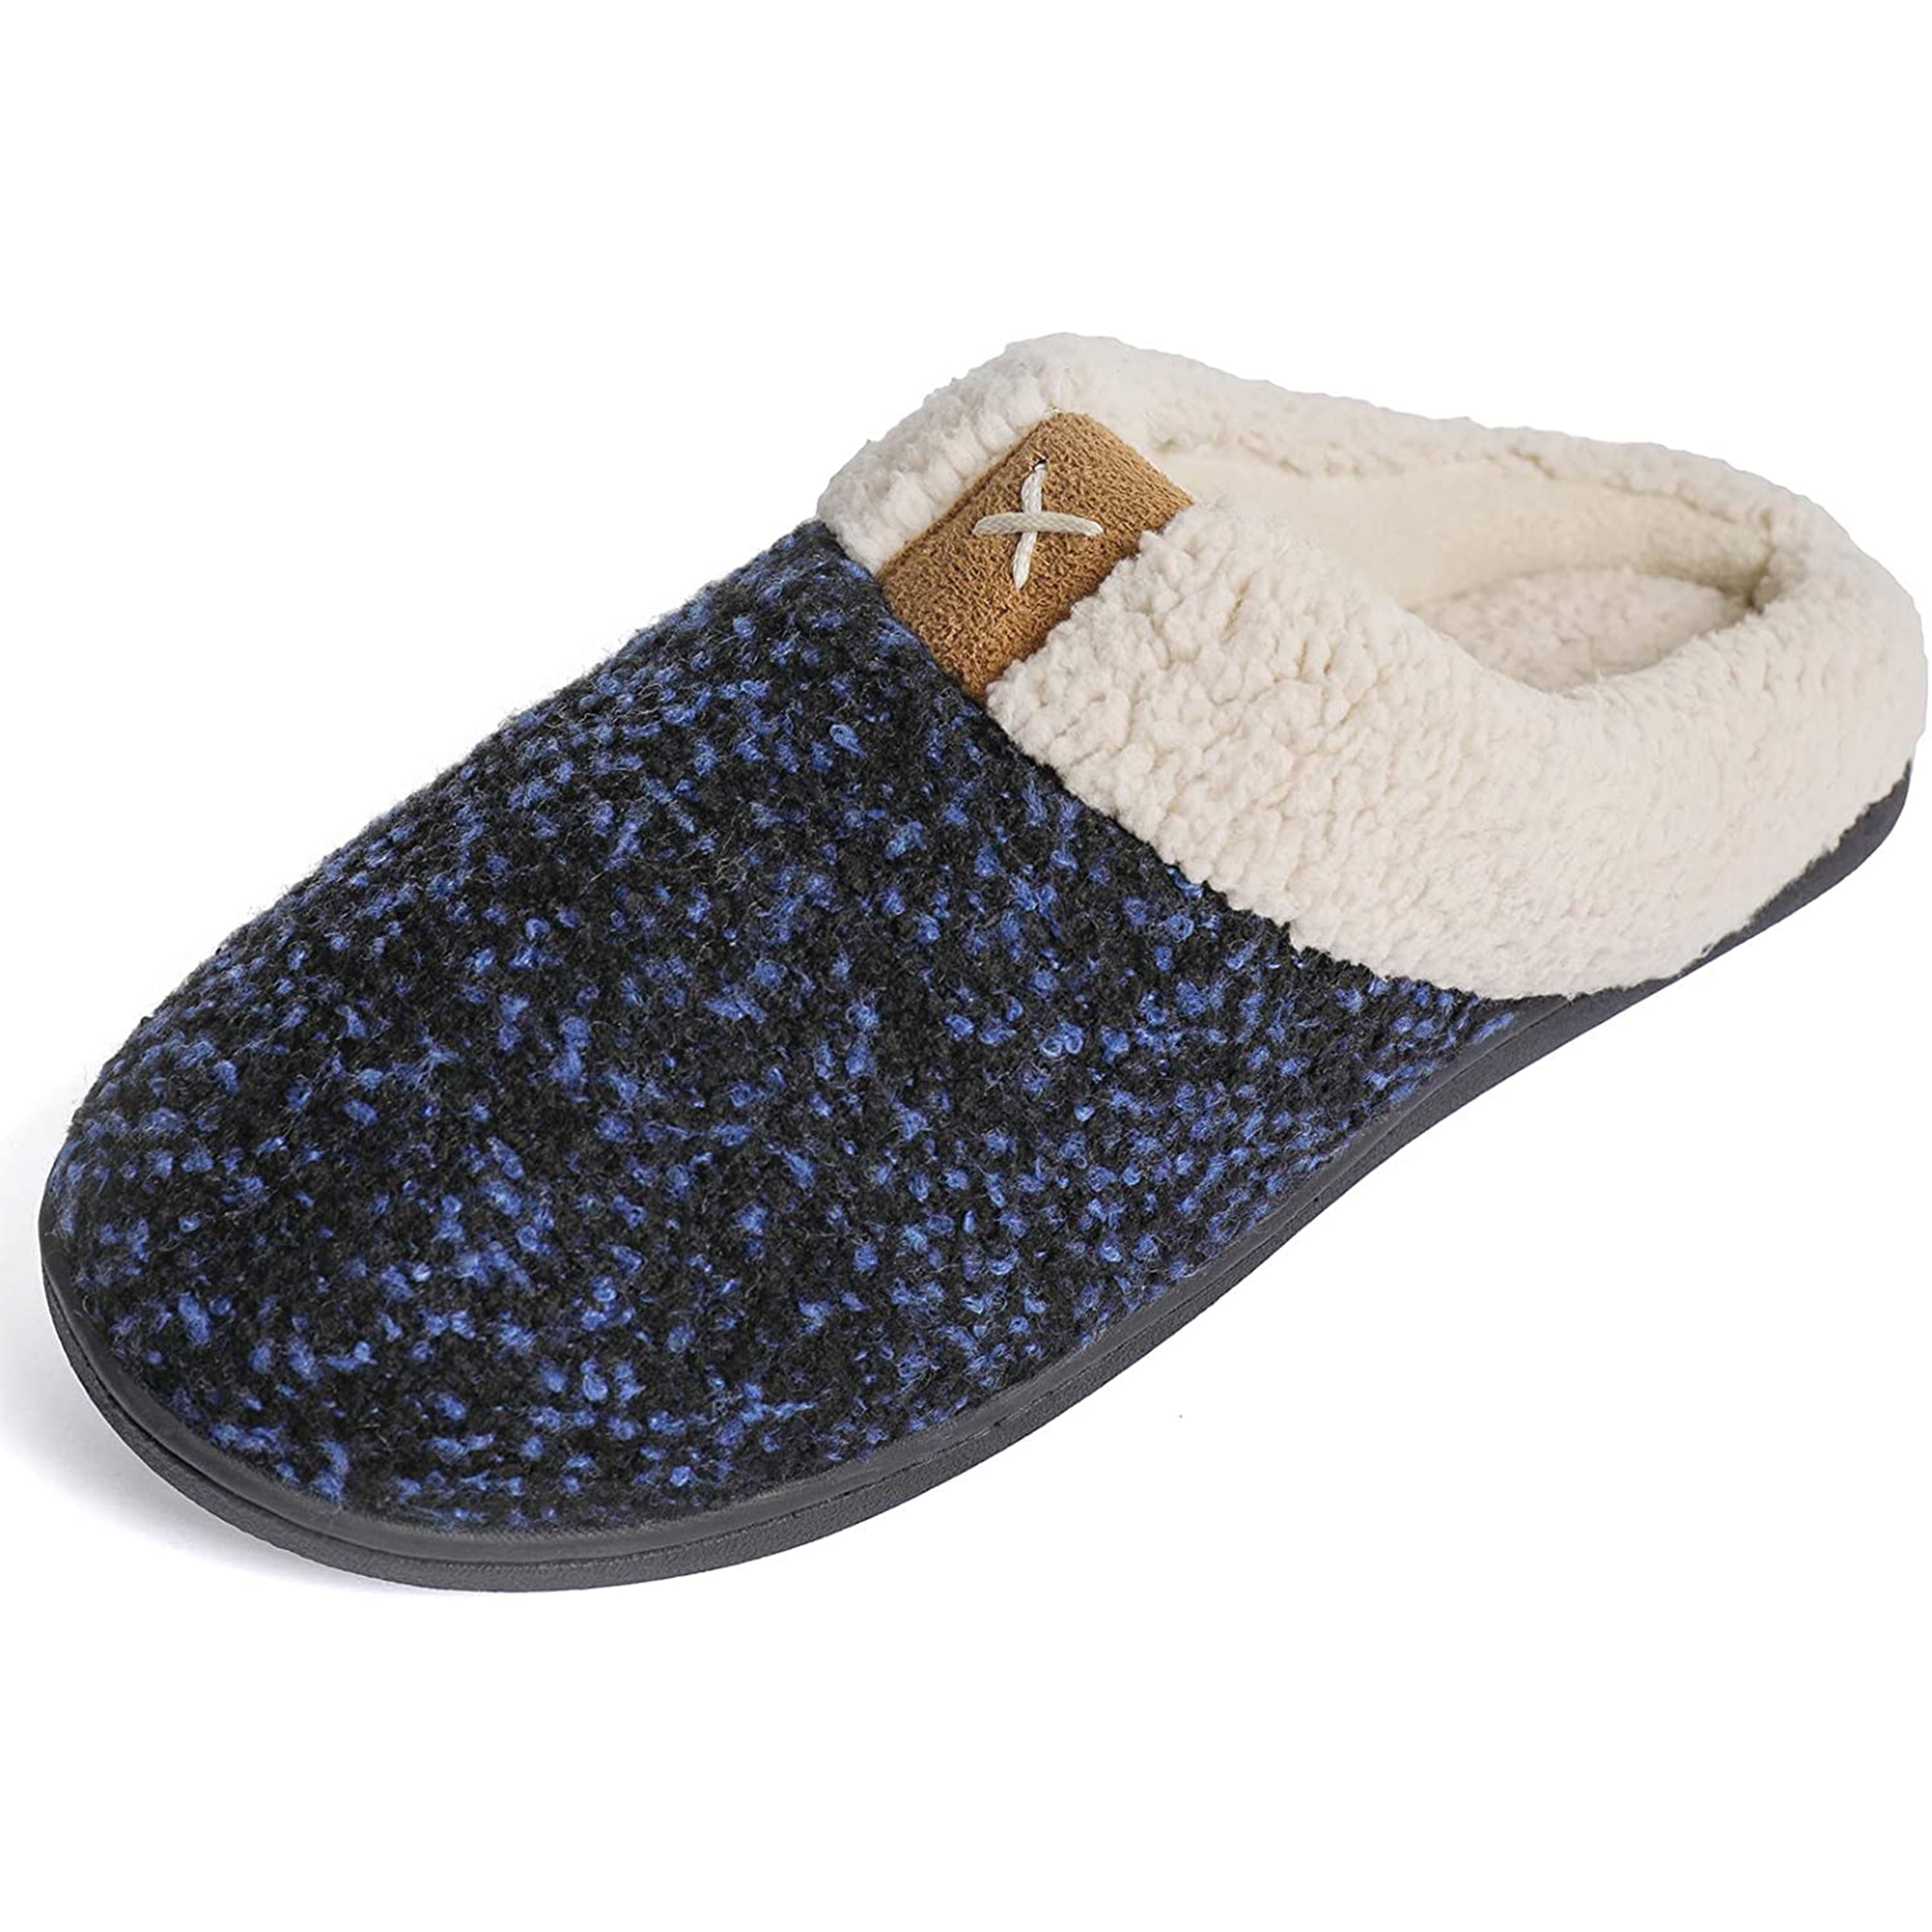 Womens Mens Cozy Memory Foam Slippers Fuzzy Wool-Like Plush Lined House Shoes w/Indoor Outdoor Anti-Skid Rubber Sole 